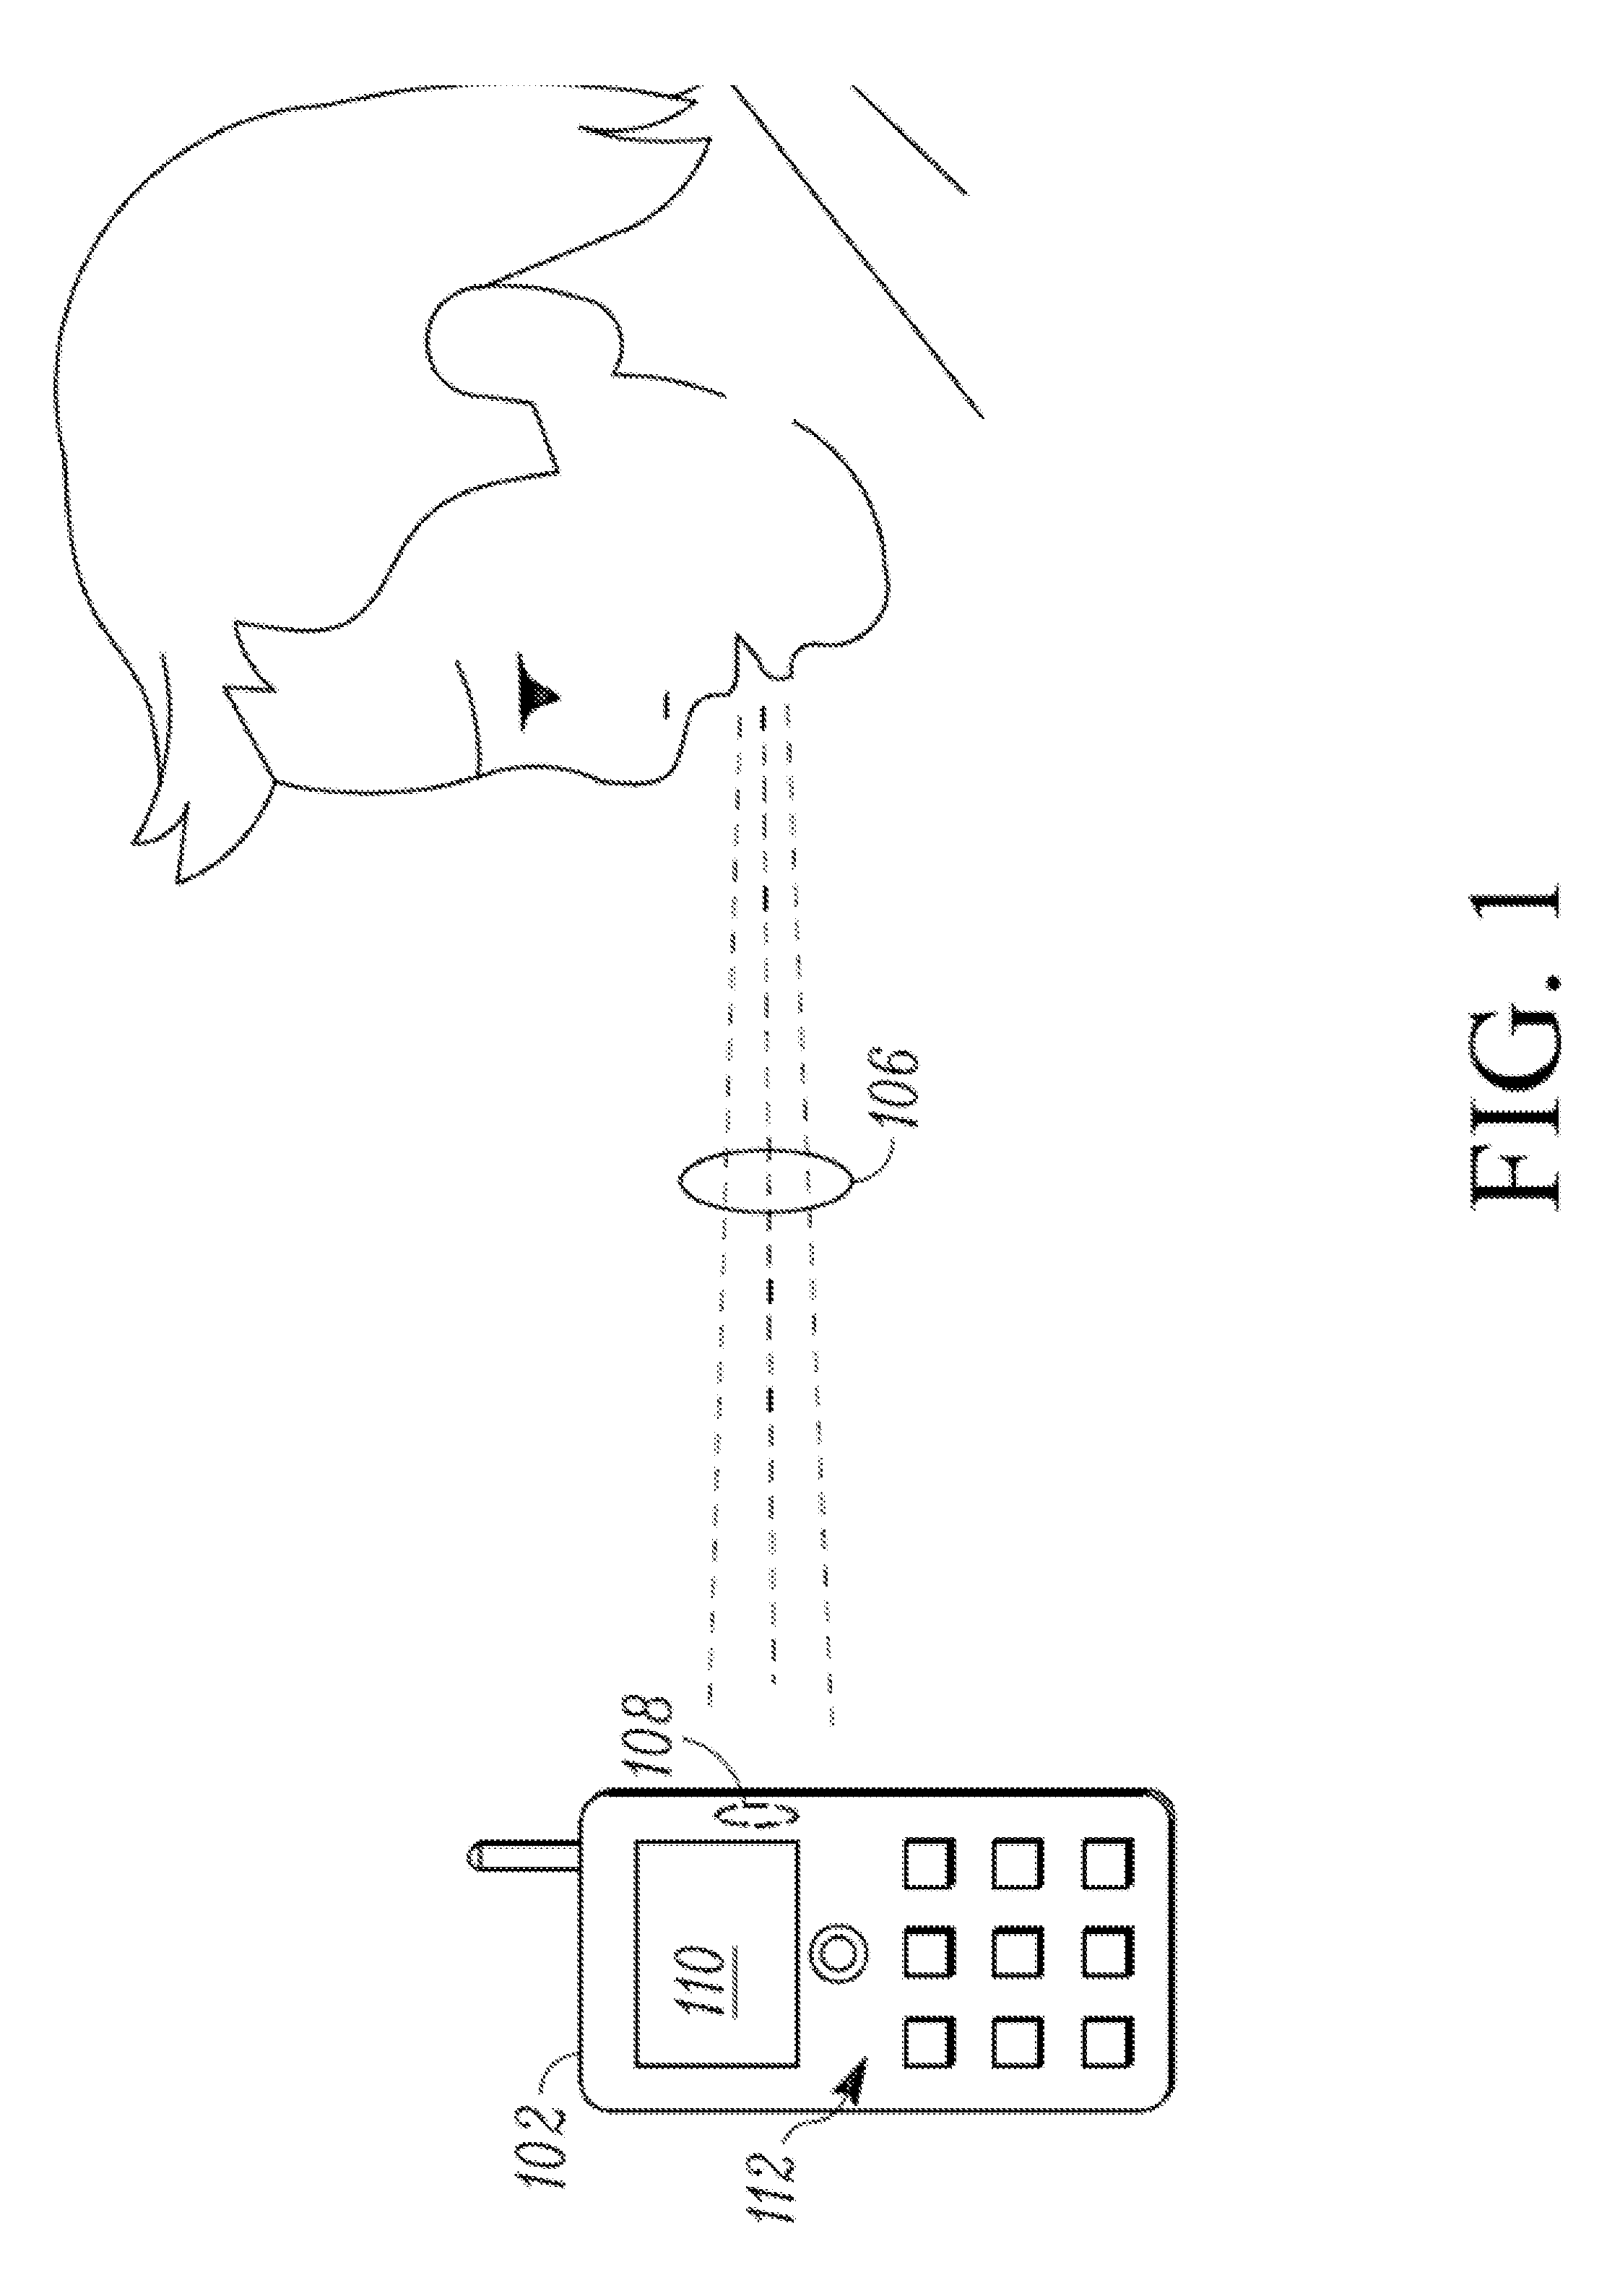 Method and Apparatus for Acoustically Characterizing an Environment in which an Electronic Device Resides